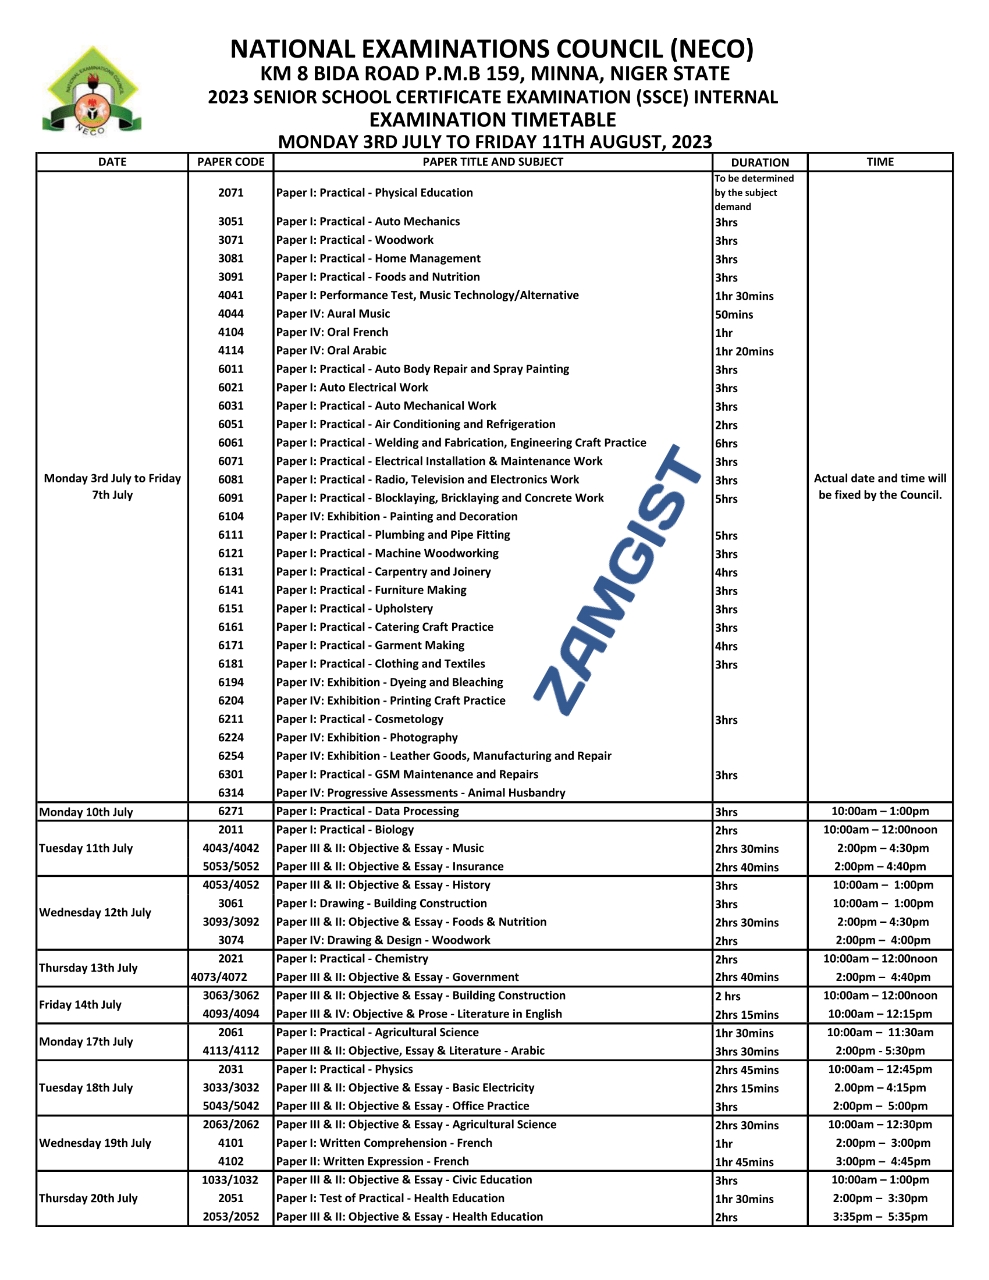 Neco Timetable 2023 Images